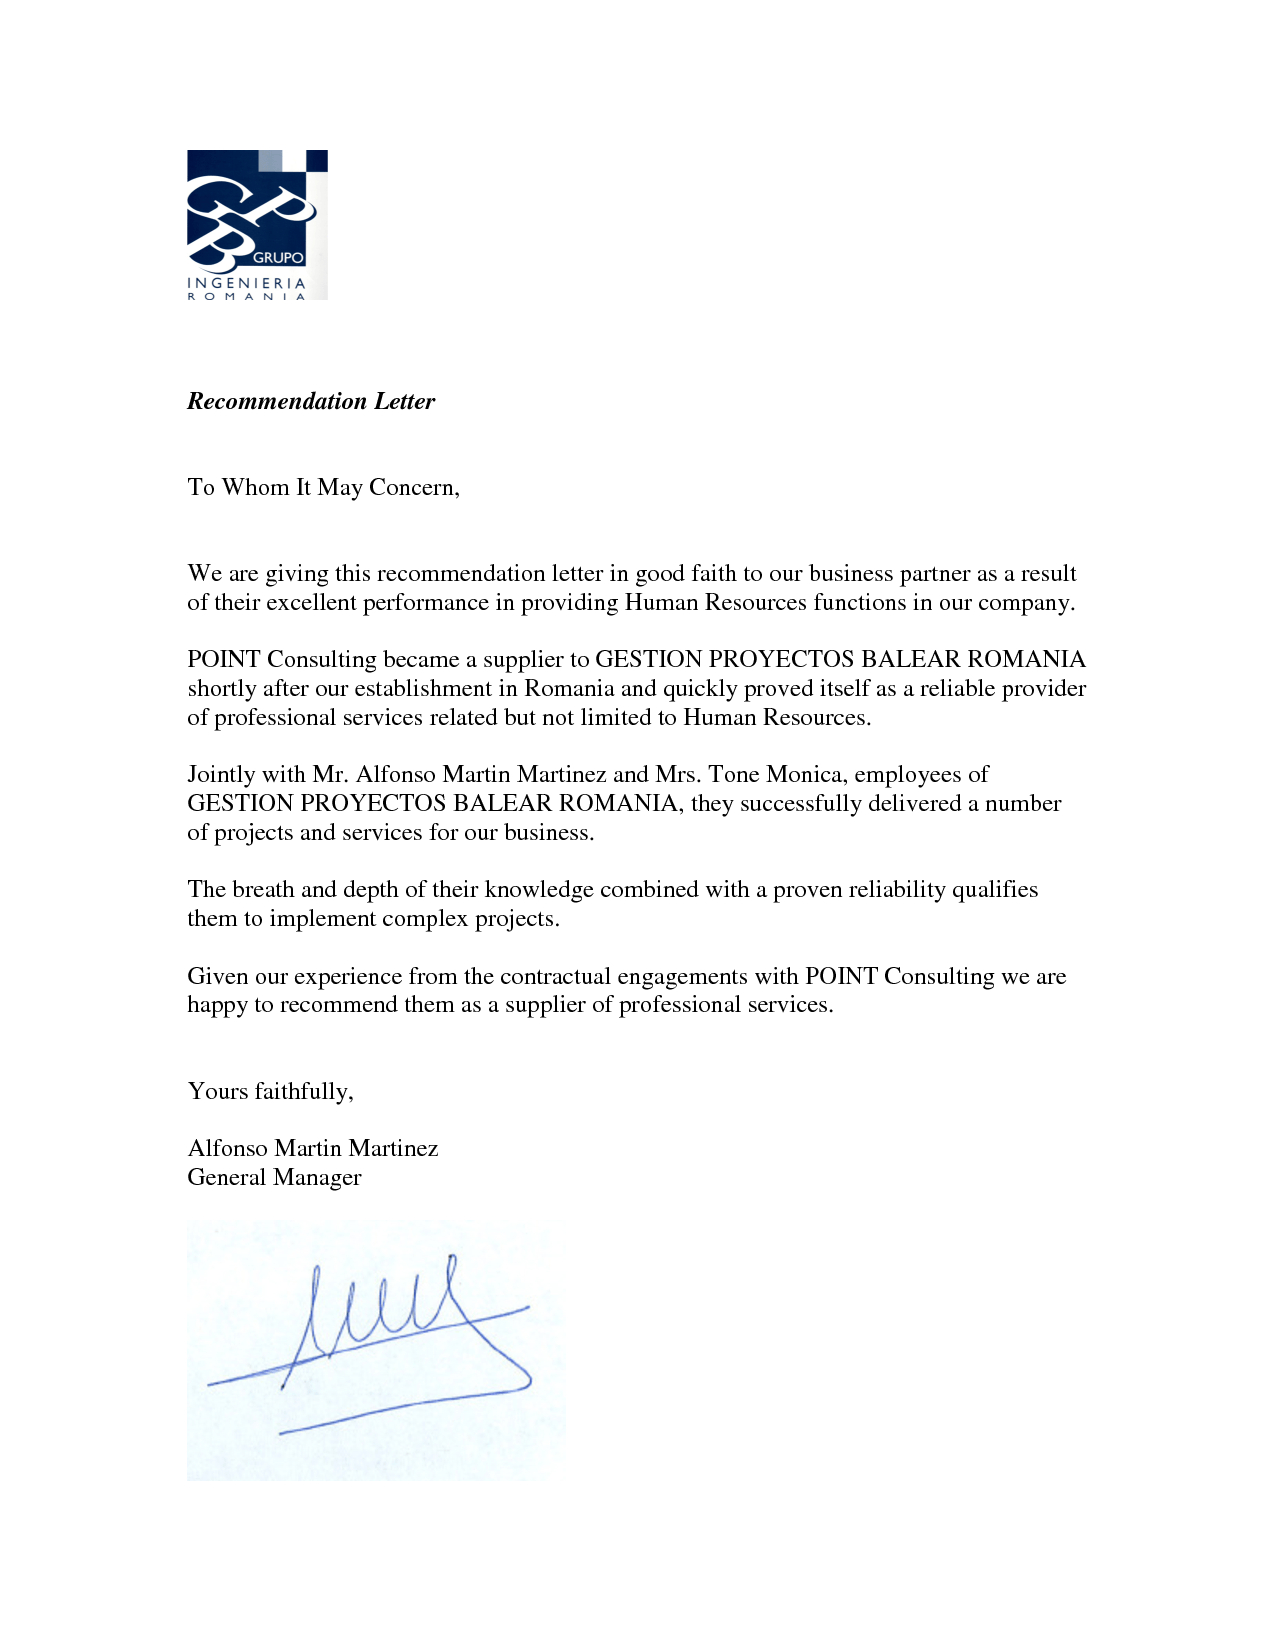 Business Recommendation Letter For A Company Debandje within measurements 1275 X 1650